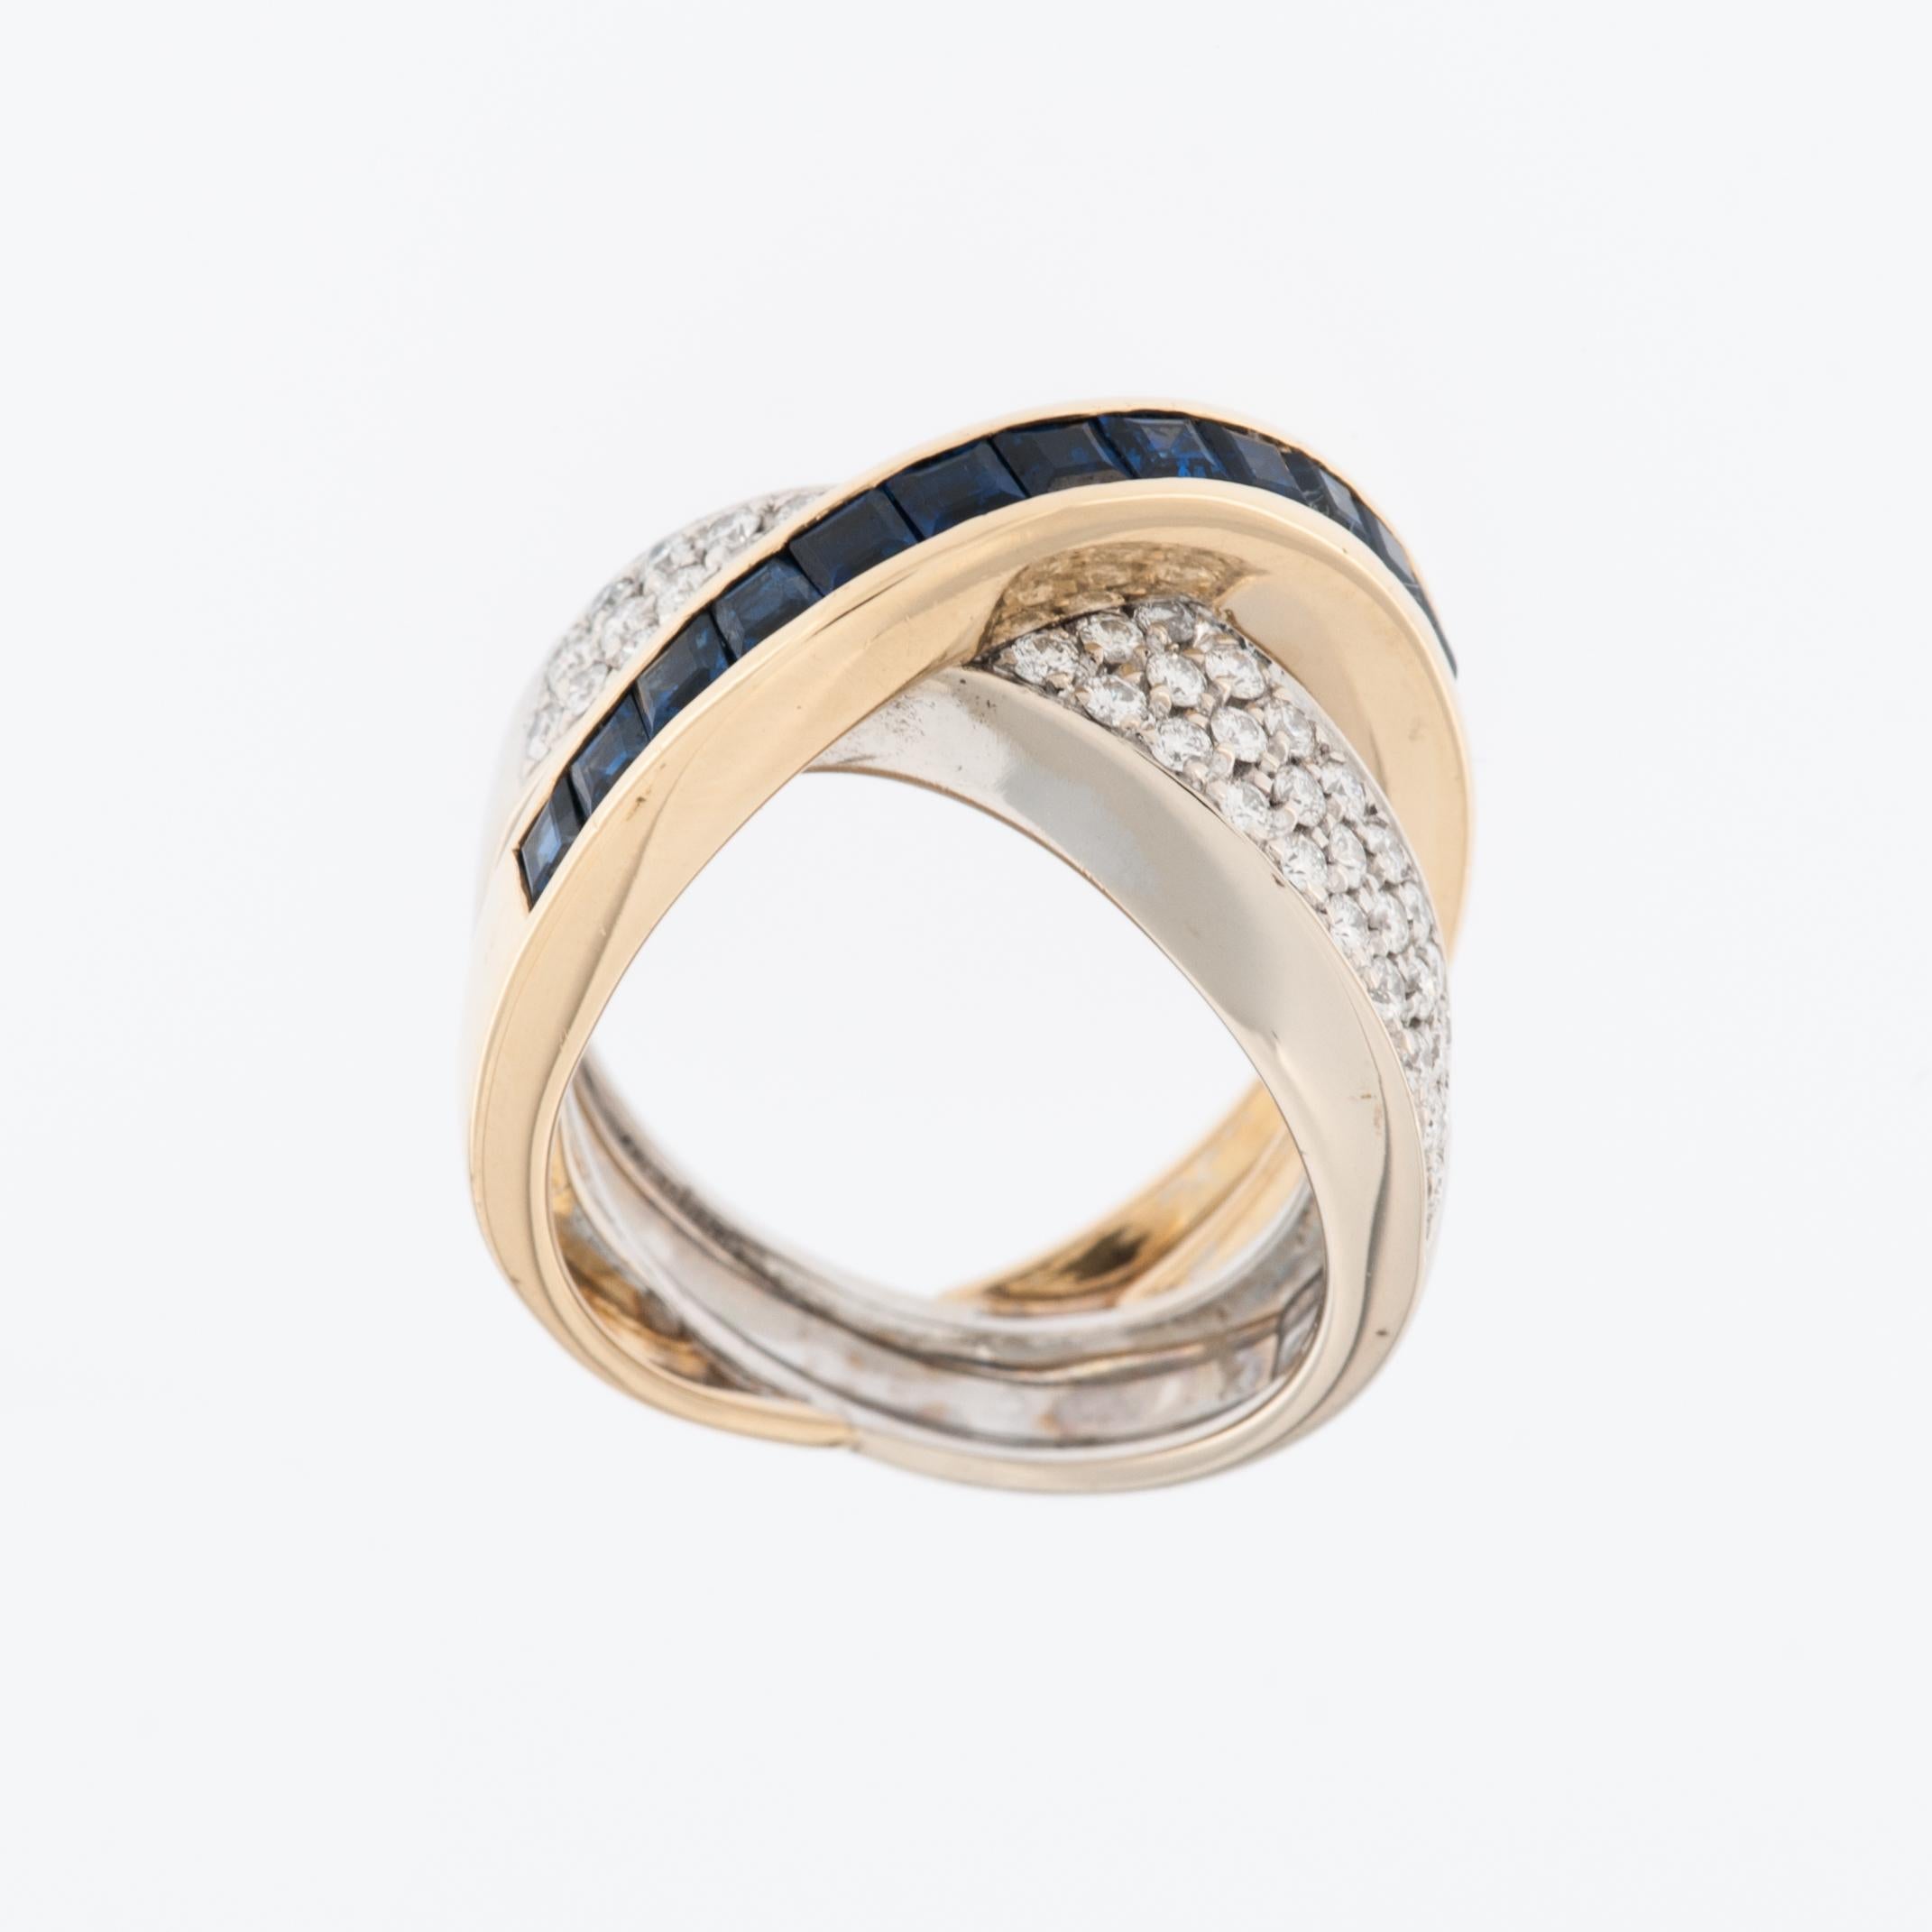 The ALFIERI & ST. JOHN Diamond and Sapphire 18kt Gold Ring is a luxurious and exquisite piece of jewelry designed to adorn the wearer's finger with elegance and sophistication. 
The ring is crafted from 18-karat yellow and white gold, which is known